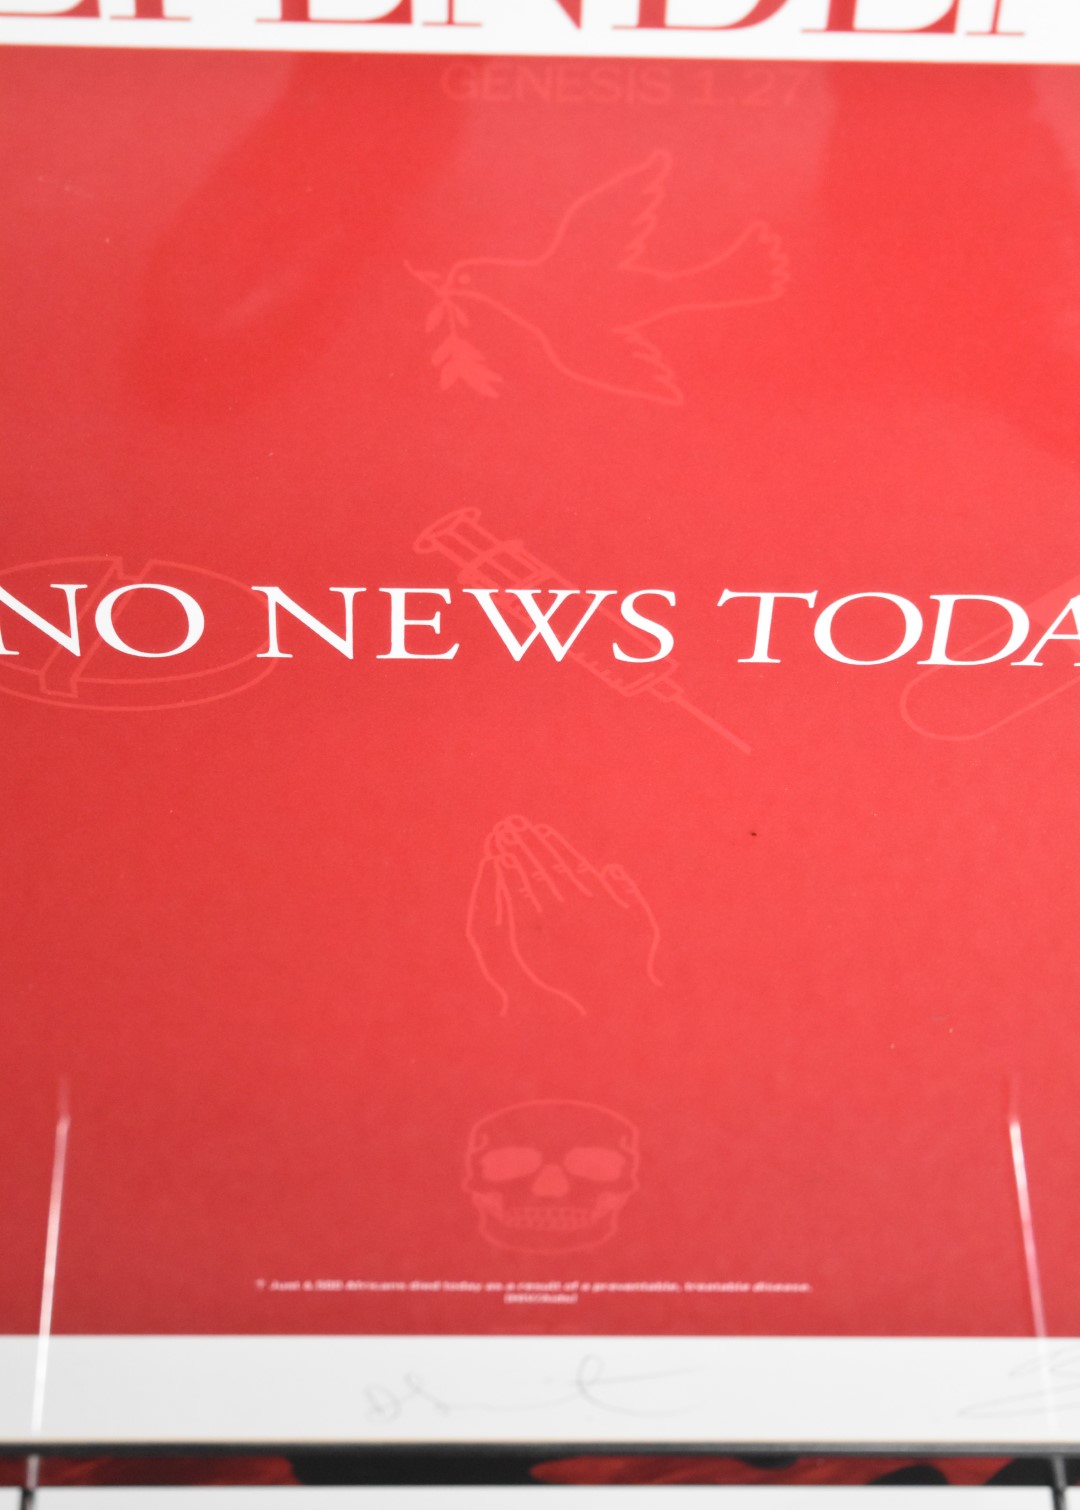 Damien Hirst (born 1965) signed limited edition (106/300) silkscreen print 'No News Today', 2006, - Image 3 of 5